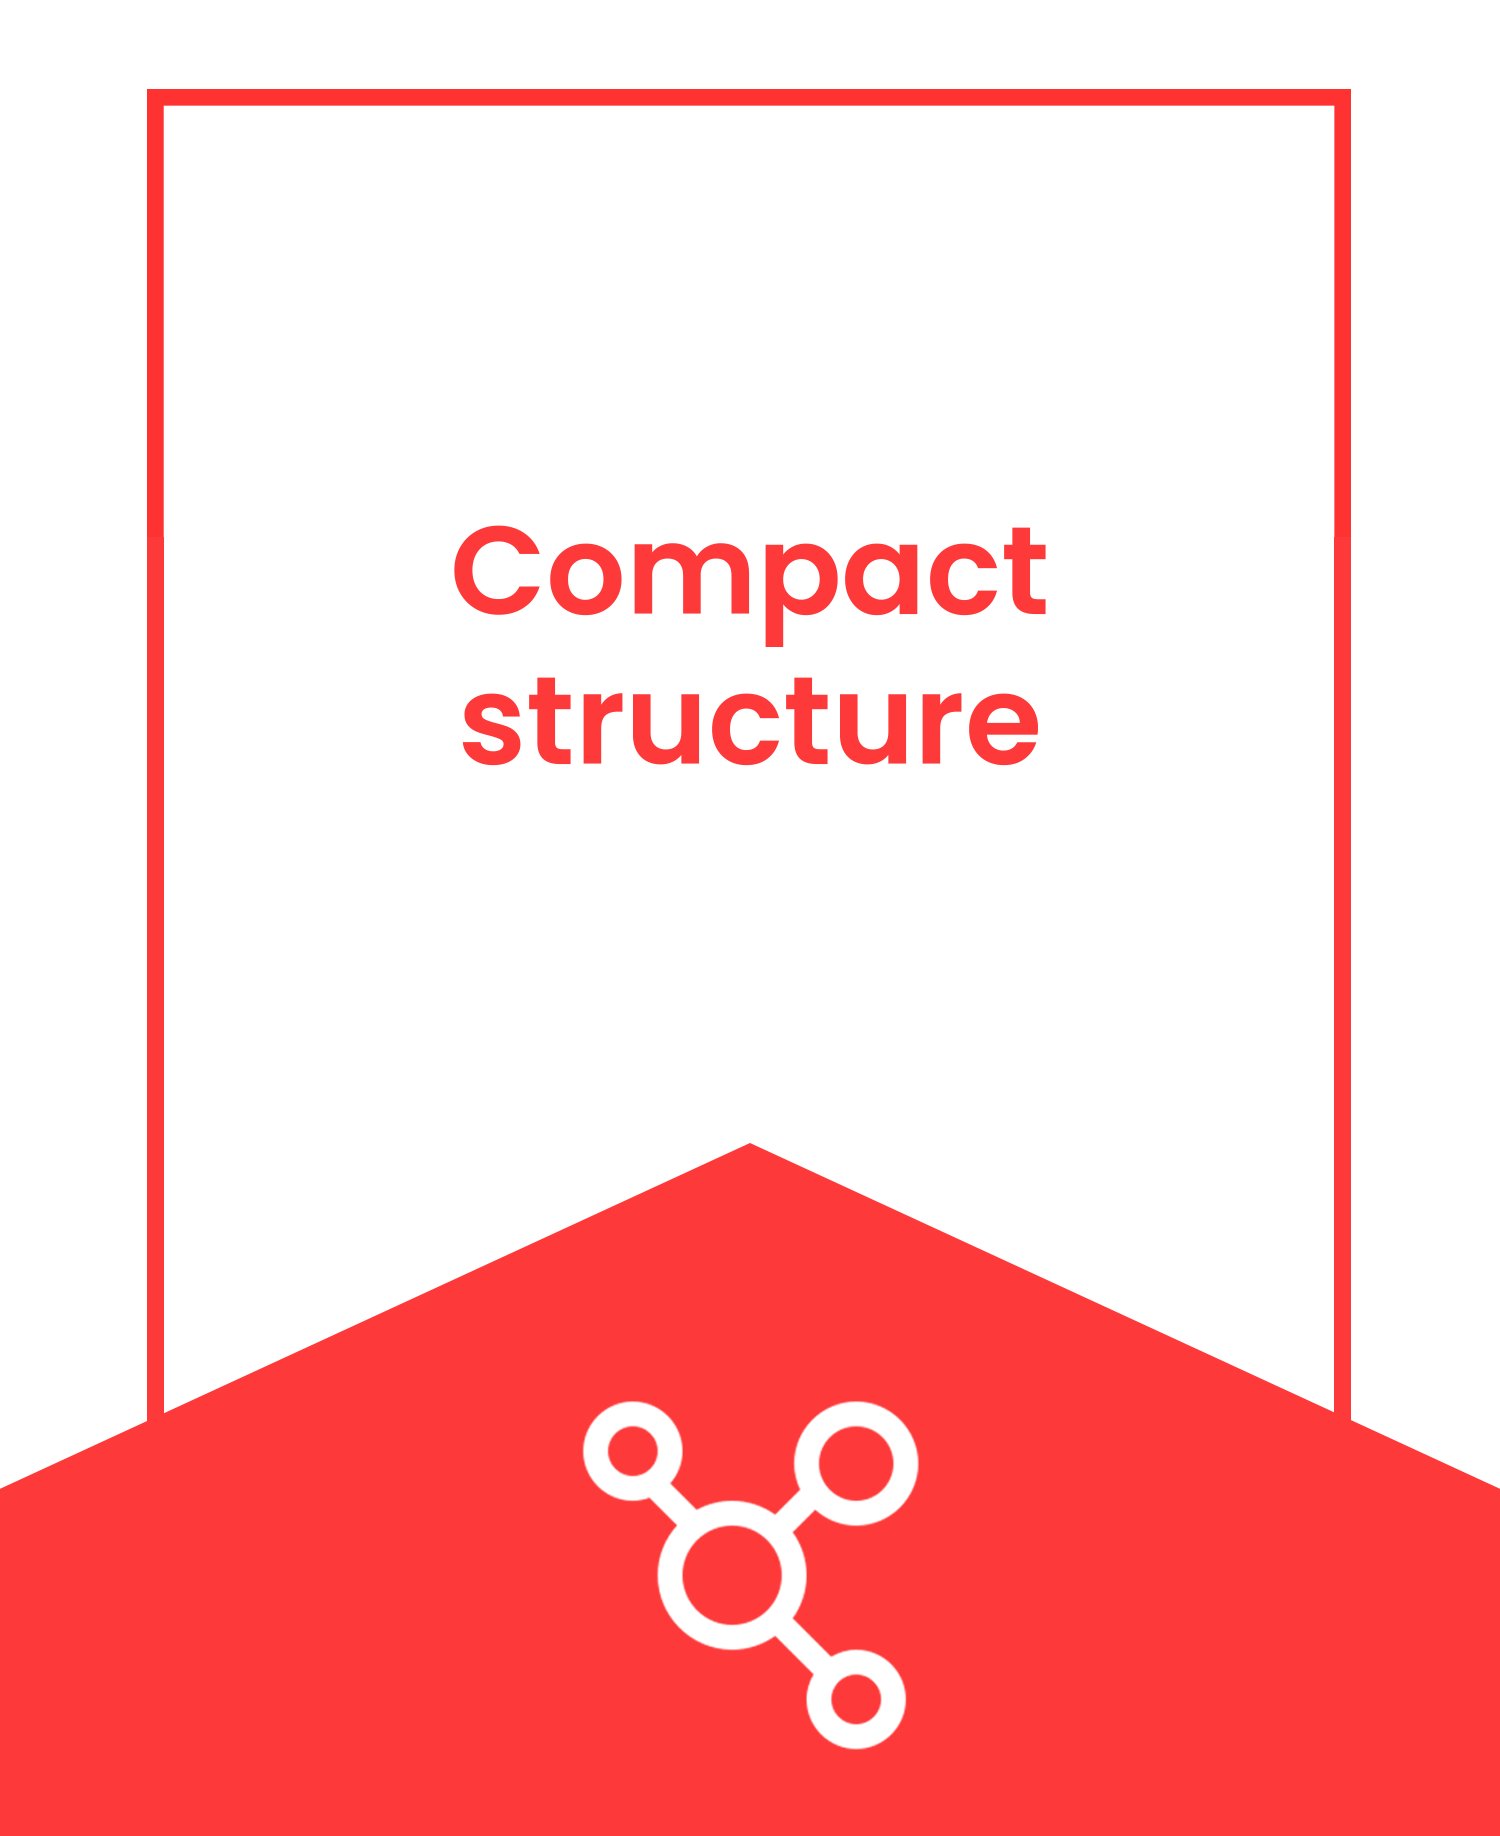 Compact structure